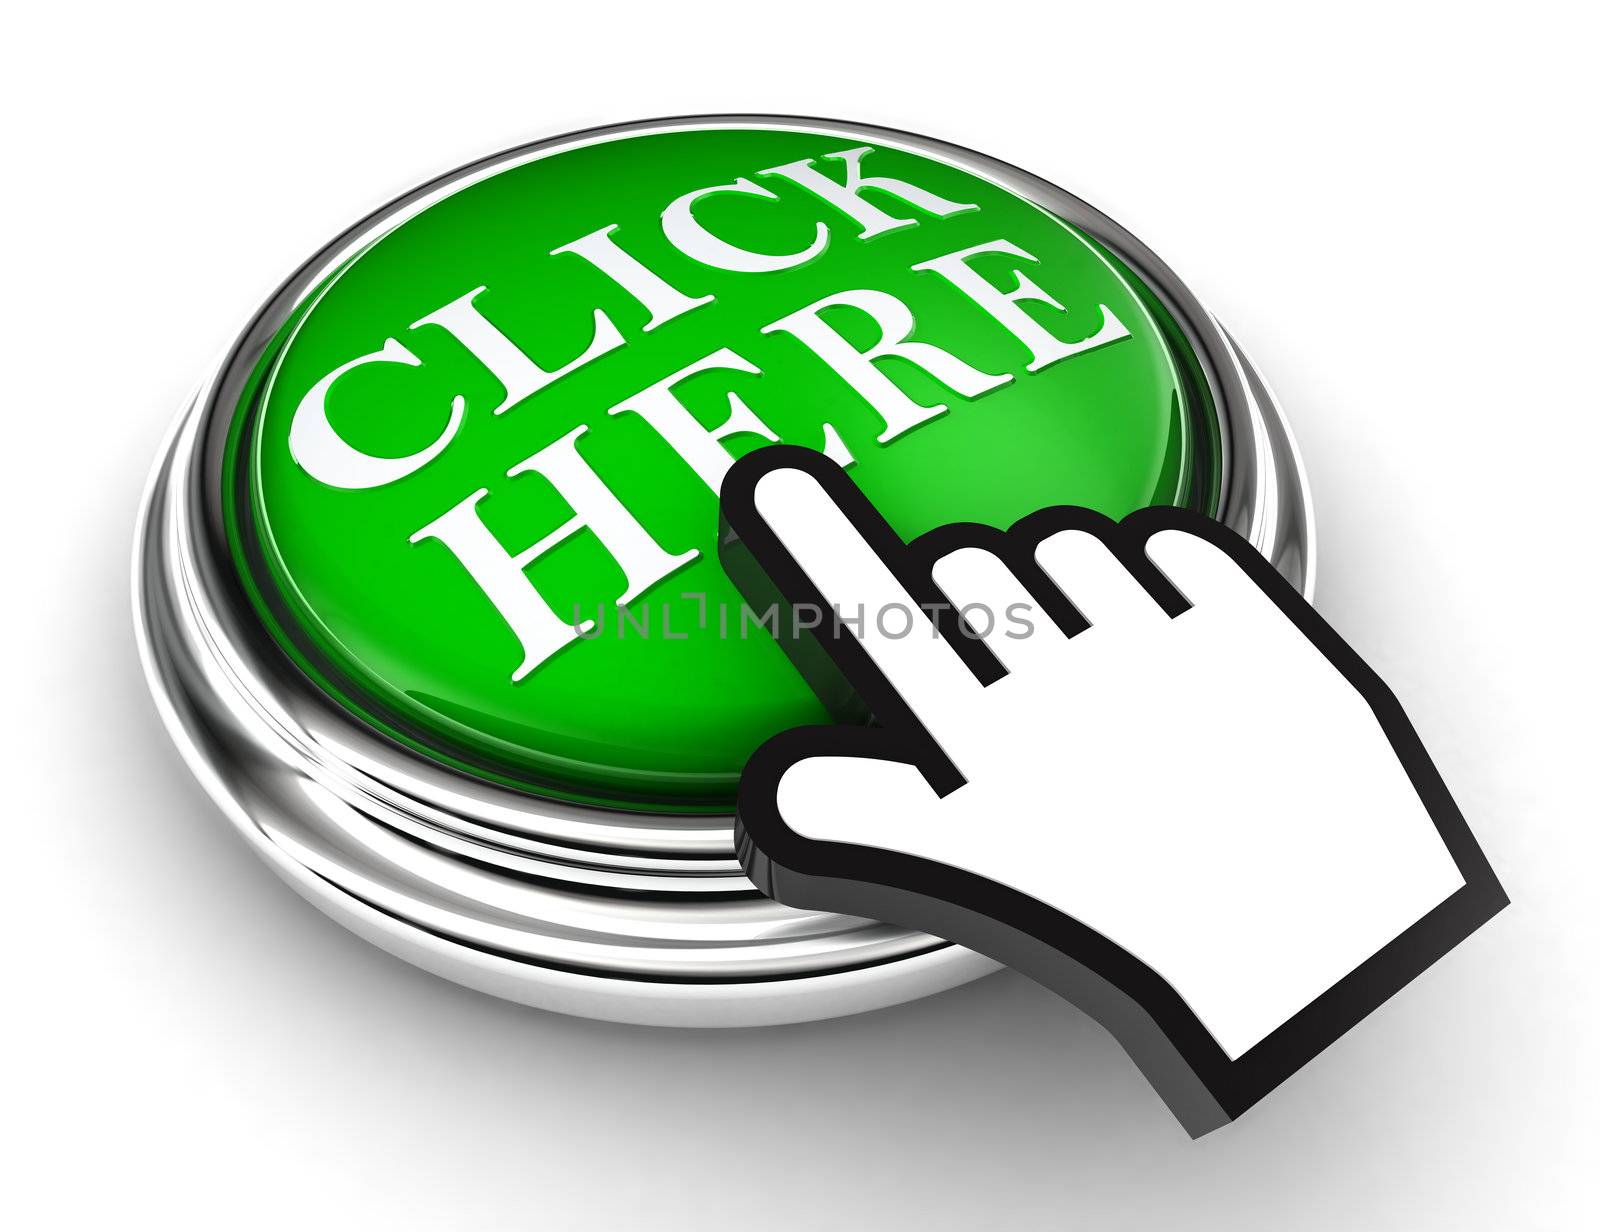 click here green button and cursor hand on white background. clipping paths included